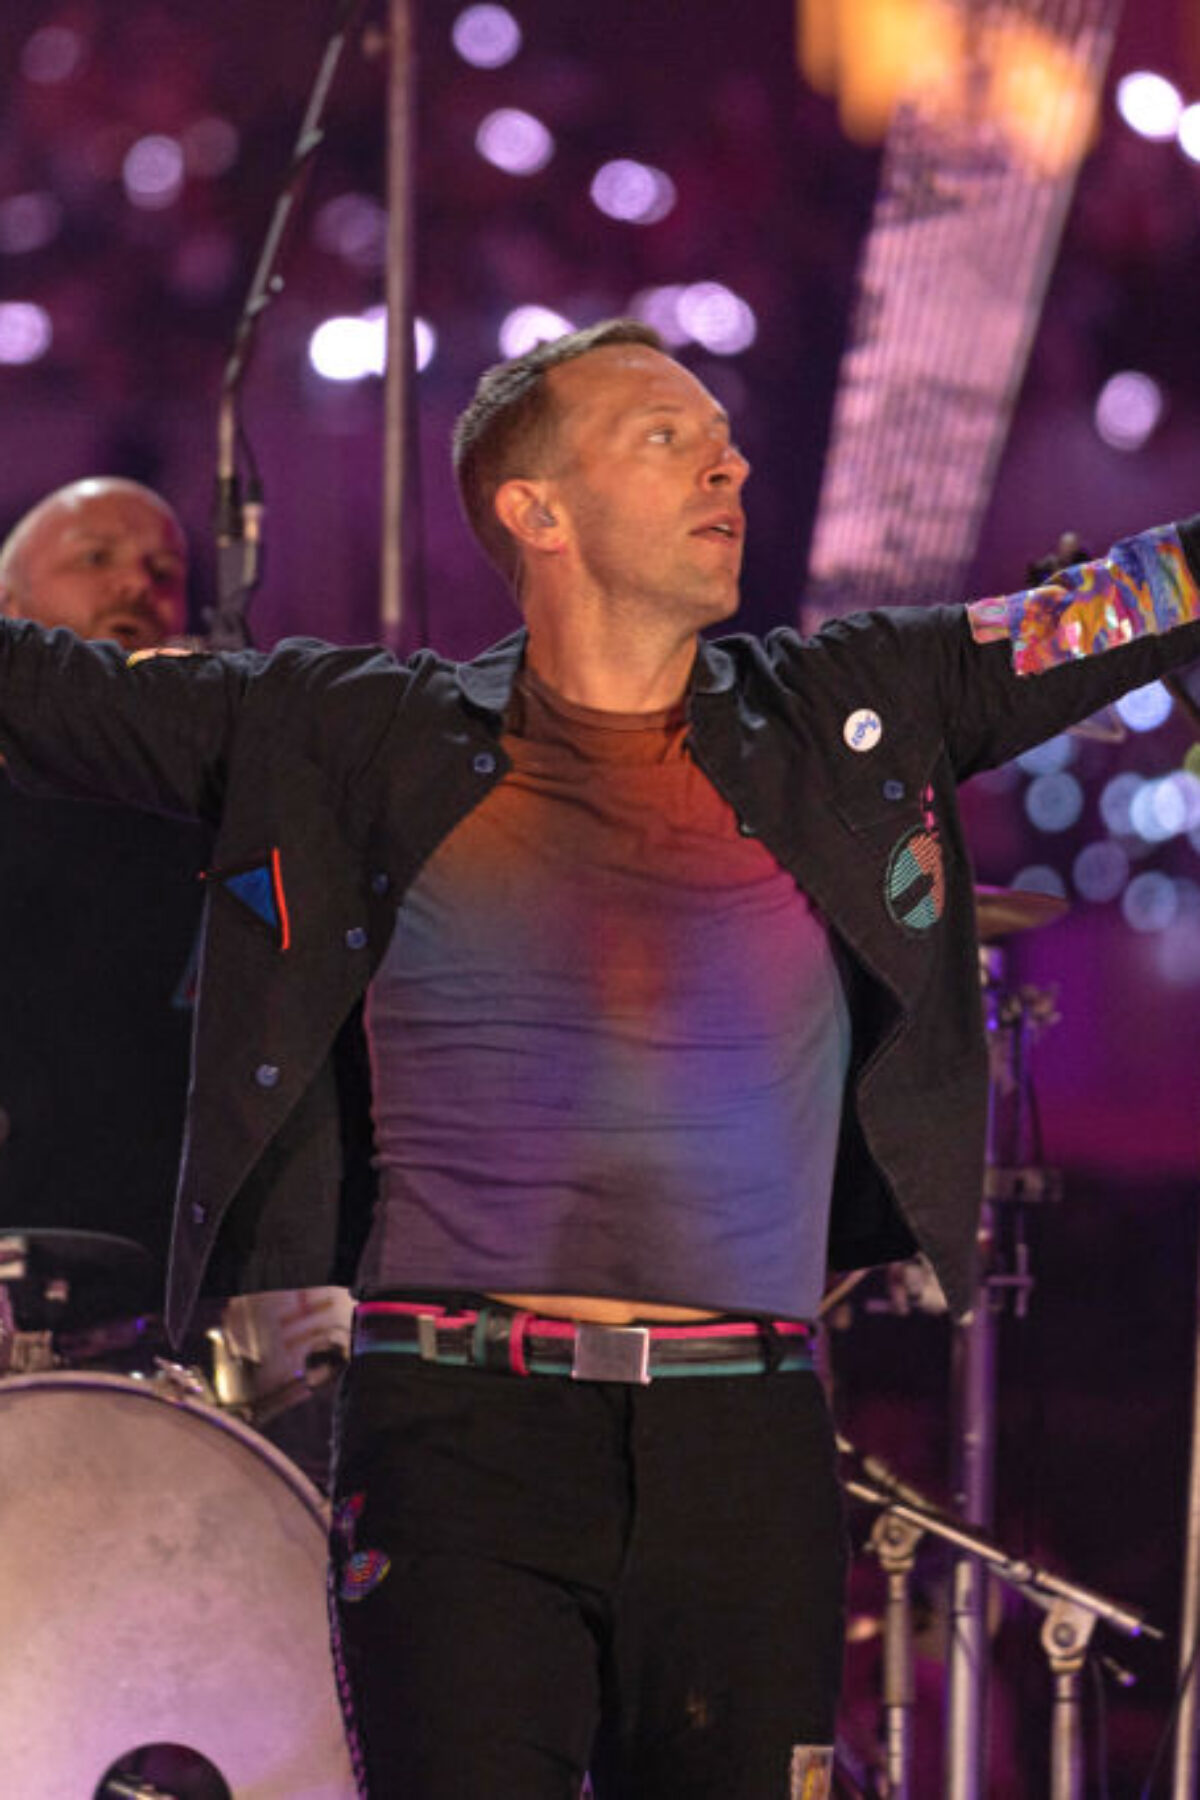 DUBAI, UNITED ARAB EMIRATES - FEBRUARY 15: Will Champion and Chris Martin of Coldplay perform live on stage at Al Wasl Plaza on February 15, 2022 in Dubai, United Arab Emirates. (Photo by Shlomi Pinto/Getty Images)